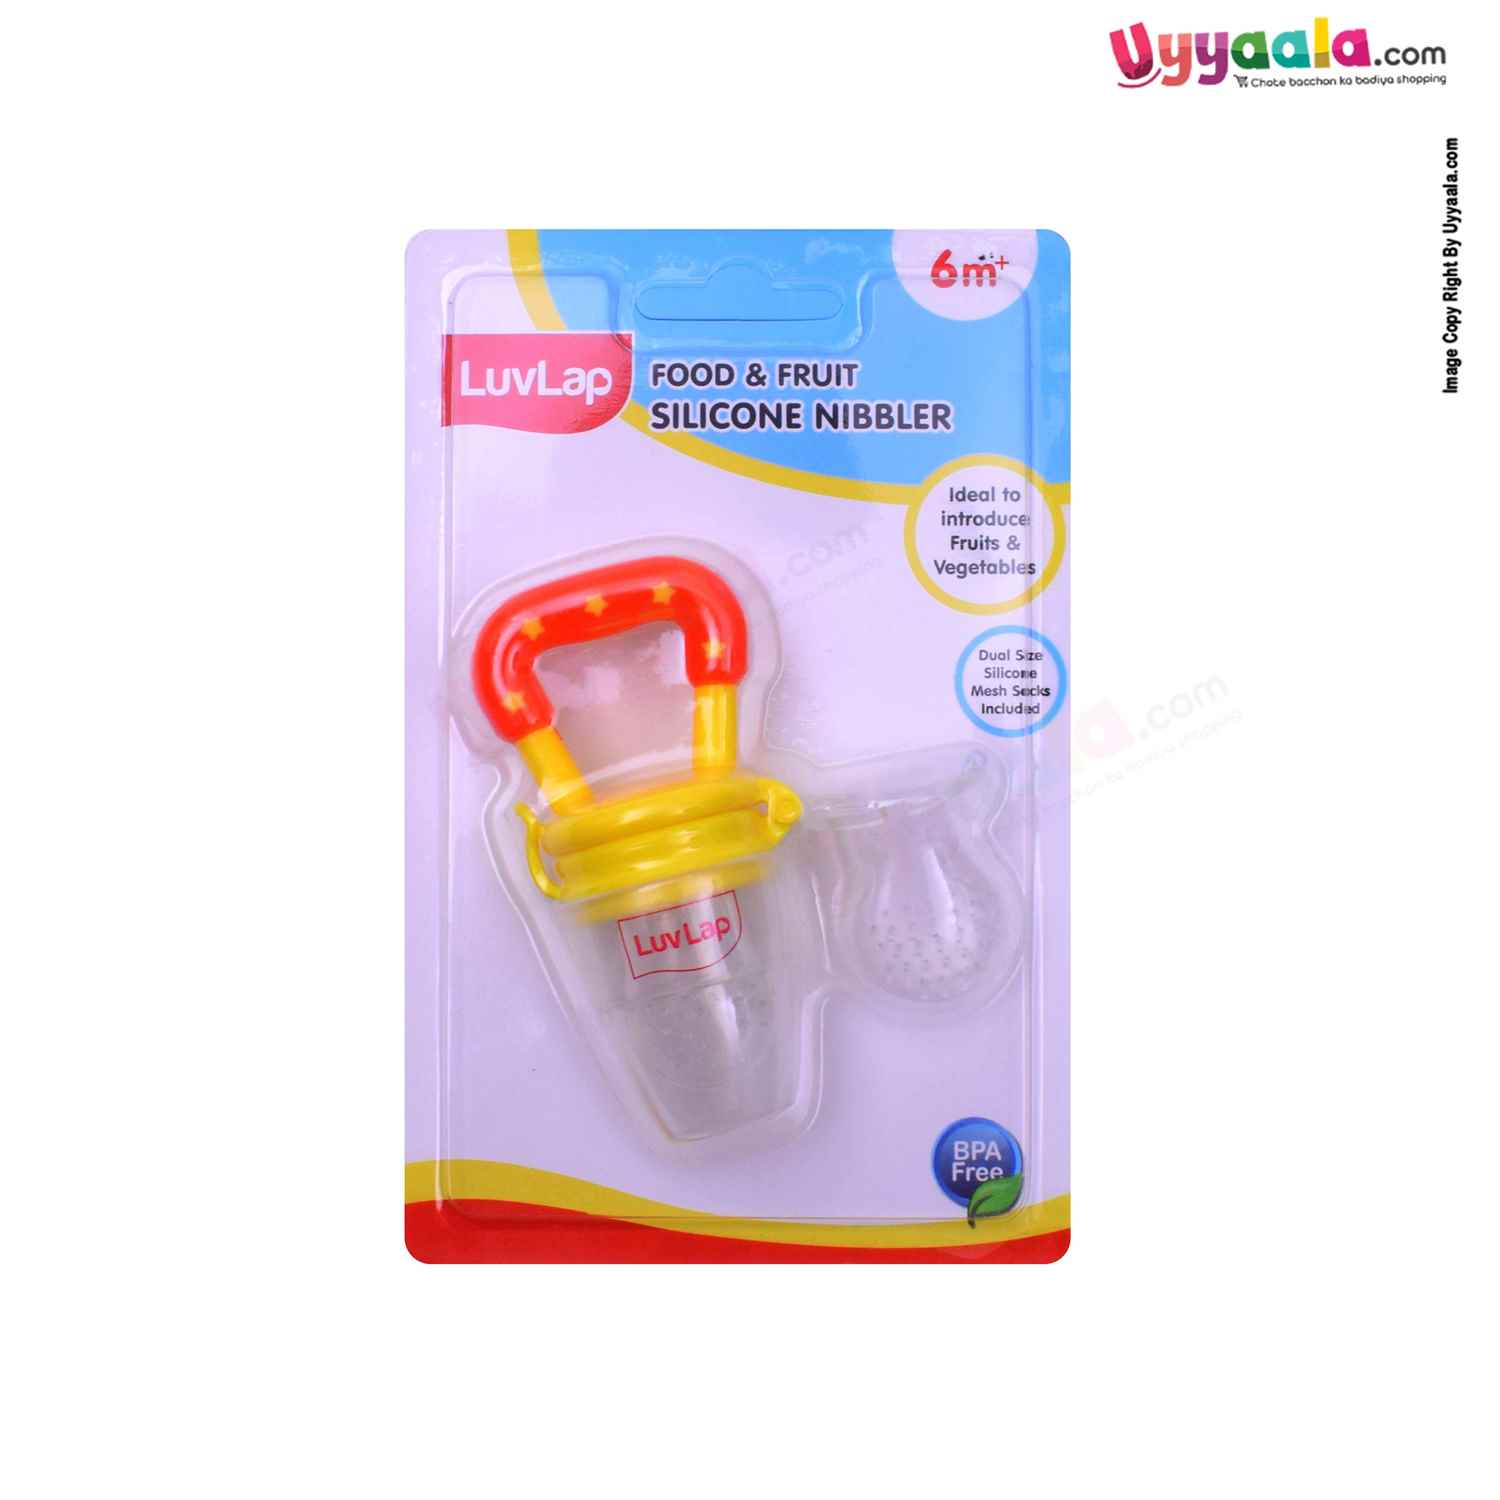 LUVLAP Food & Fruit Silicone Nibbler with Extra Silicone Mesh Sack 6+m Age - Red, Yellow